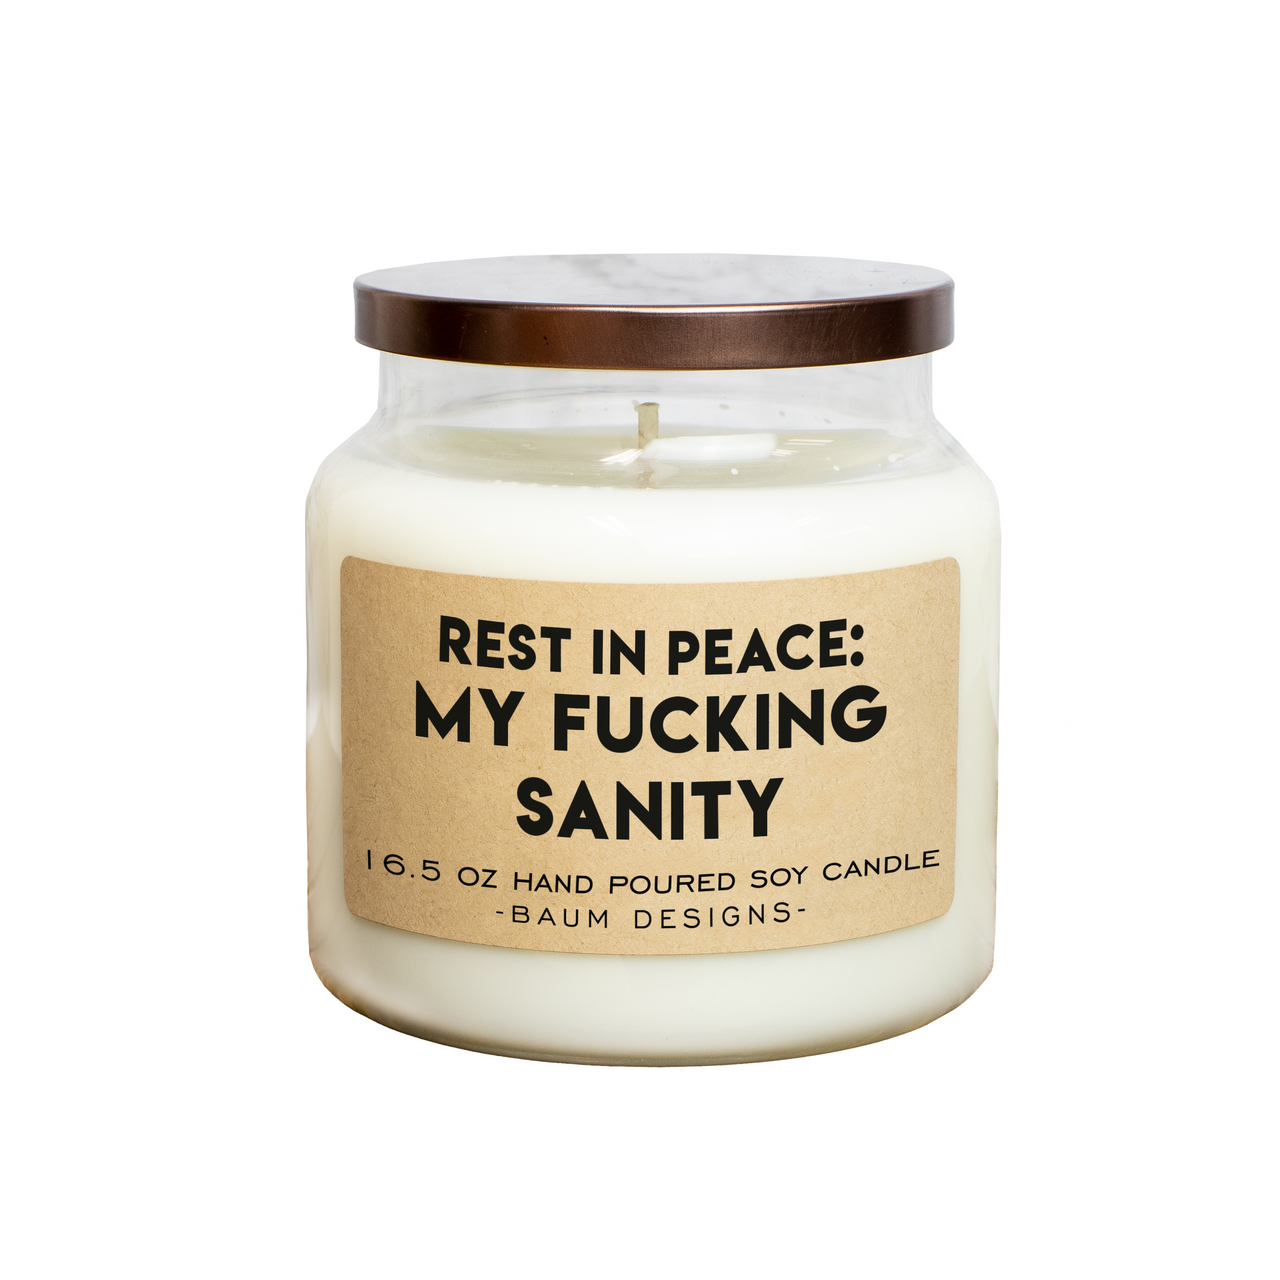 Rest In Peace: My Fucking Sanity Soy Candle